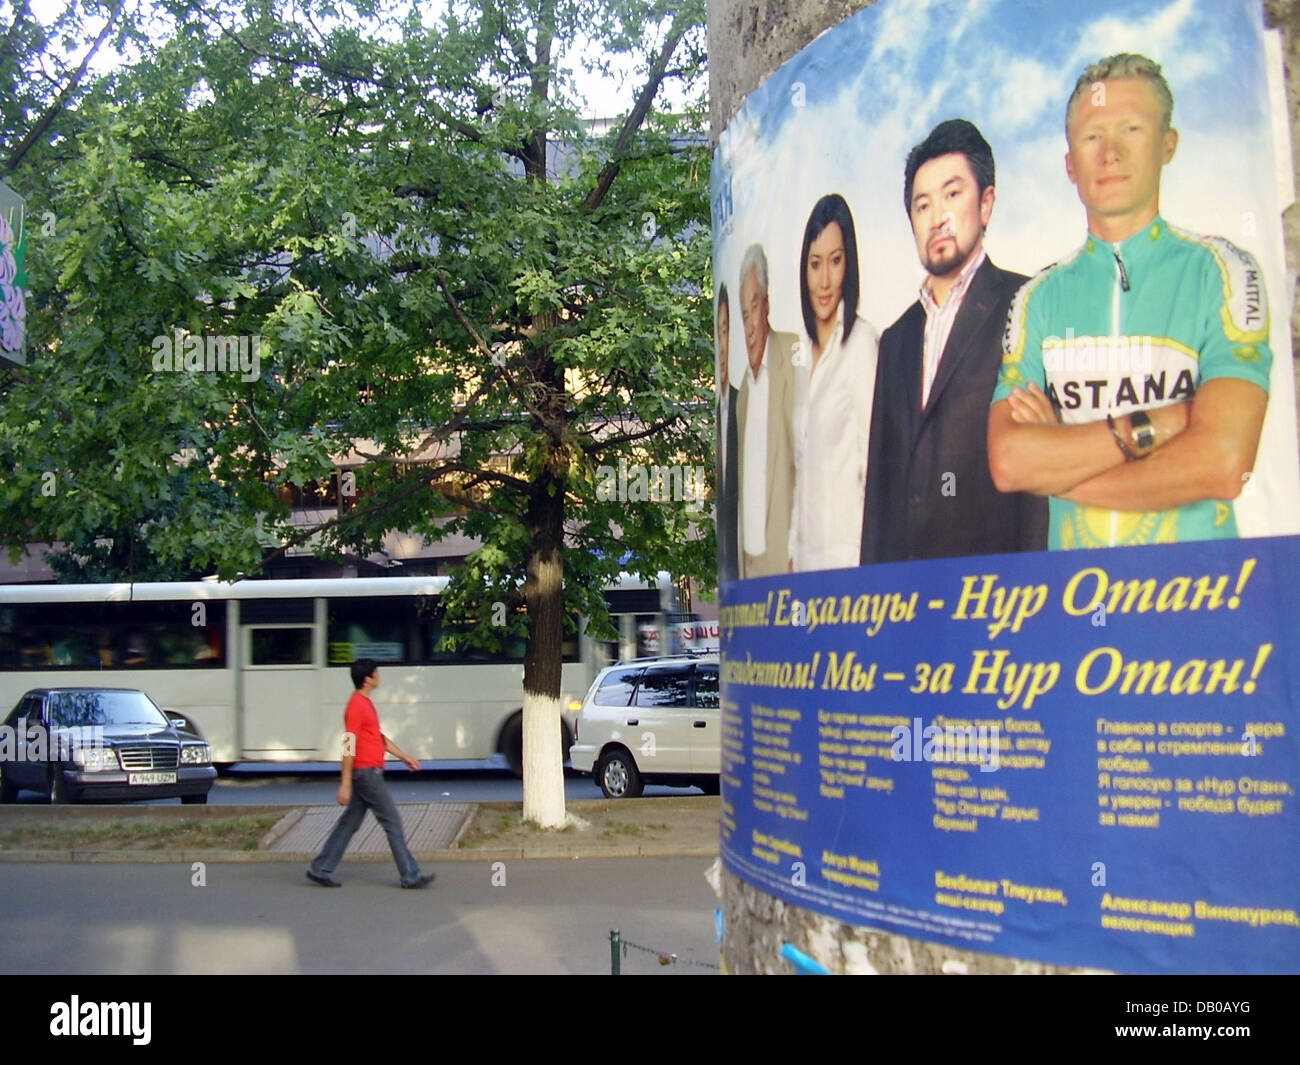 A man passes an election poster for the Kazakh party 'Nur Otan' (Shining Fatherland) in Almaty, Kazakhstan, 30 July 2007. Seven prominent Kazakhs are pictured on the poster, also cyclist Alexander Vinokourov (R). The doping scandals at this years 'Tour de France', also involving Vinokourov, have not caused harm to his popularity at his native Kazakhstan. The country holds parliamen Stock Photo